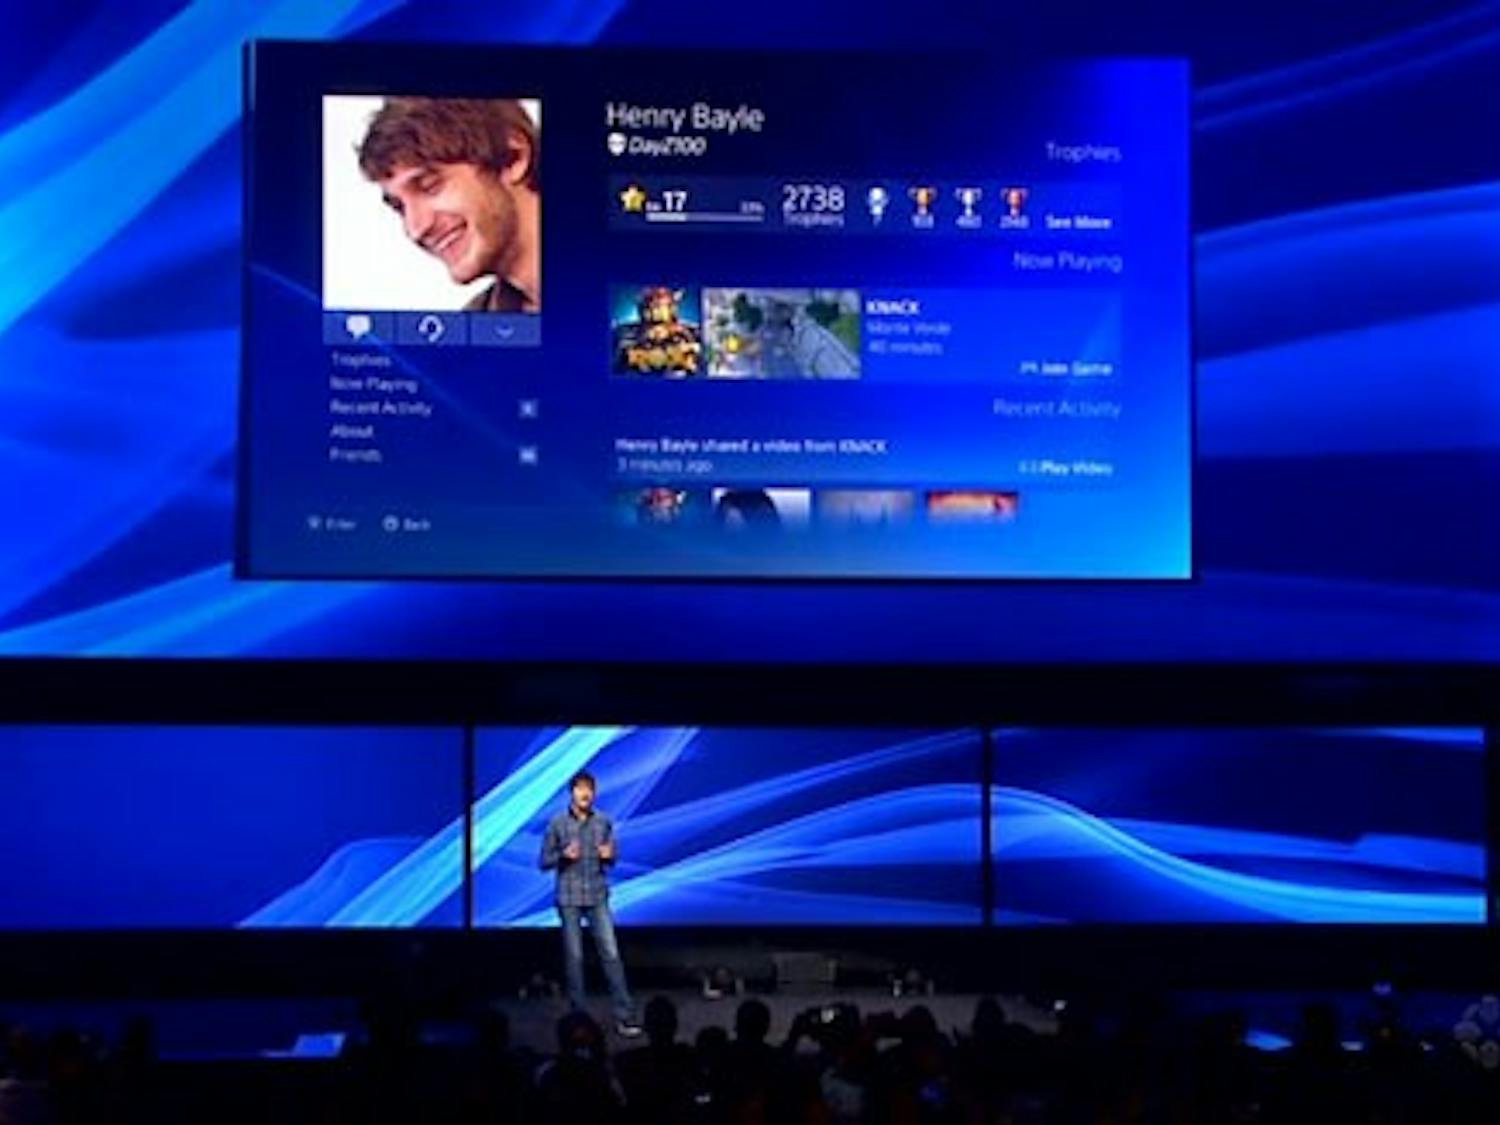 Your PSN profile can be connected to the social network of your preference, providing close friends with a more personal look at your profile while still insuring a level of anonymity against other PSN users. Screenshot by Preston Sotelo